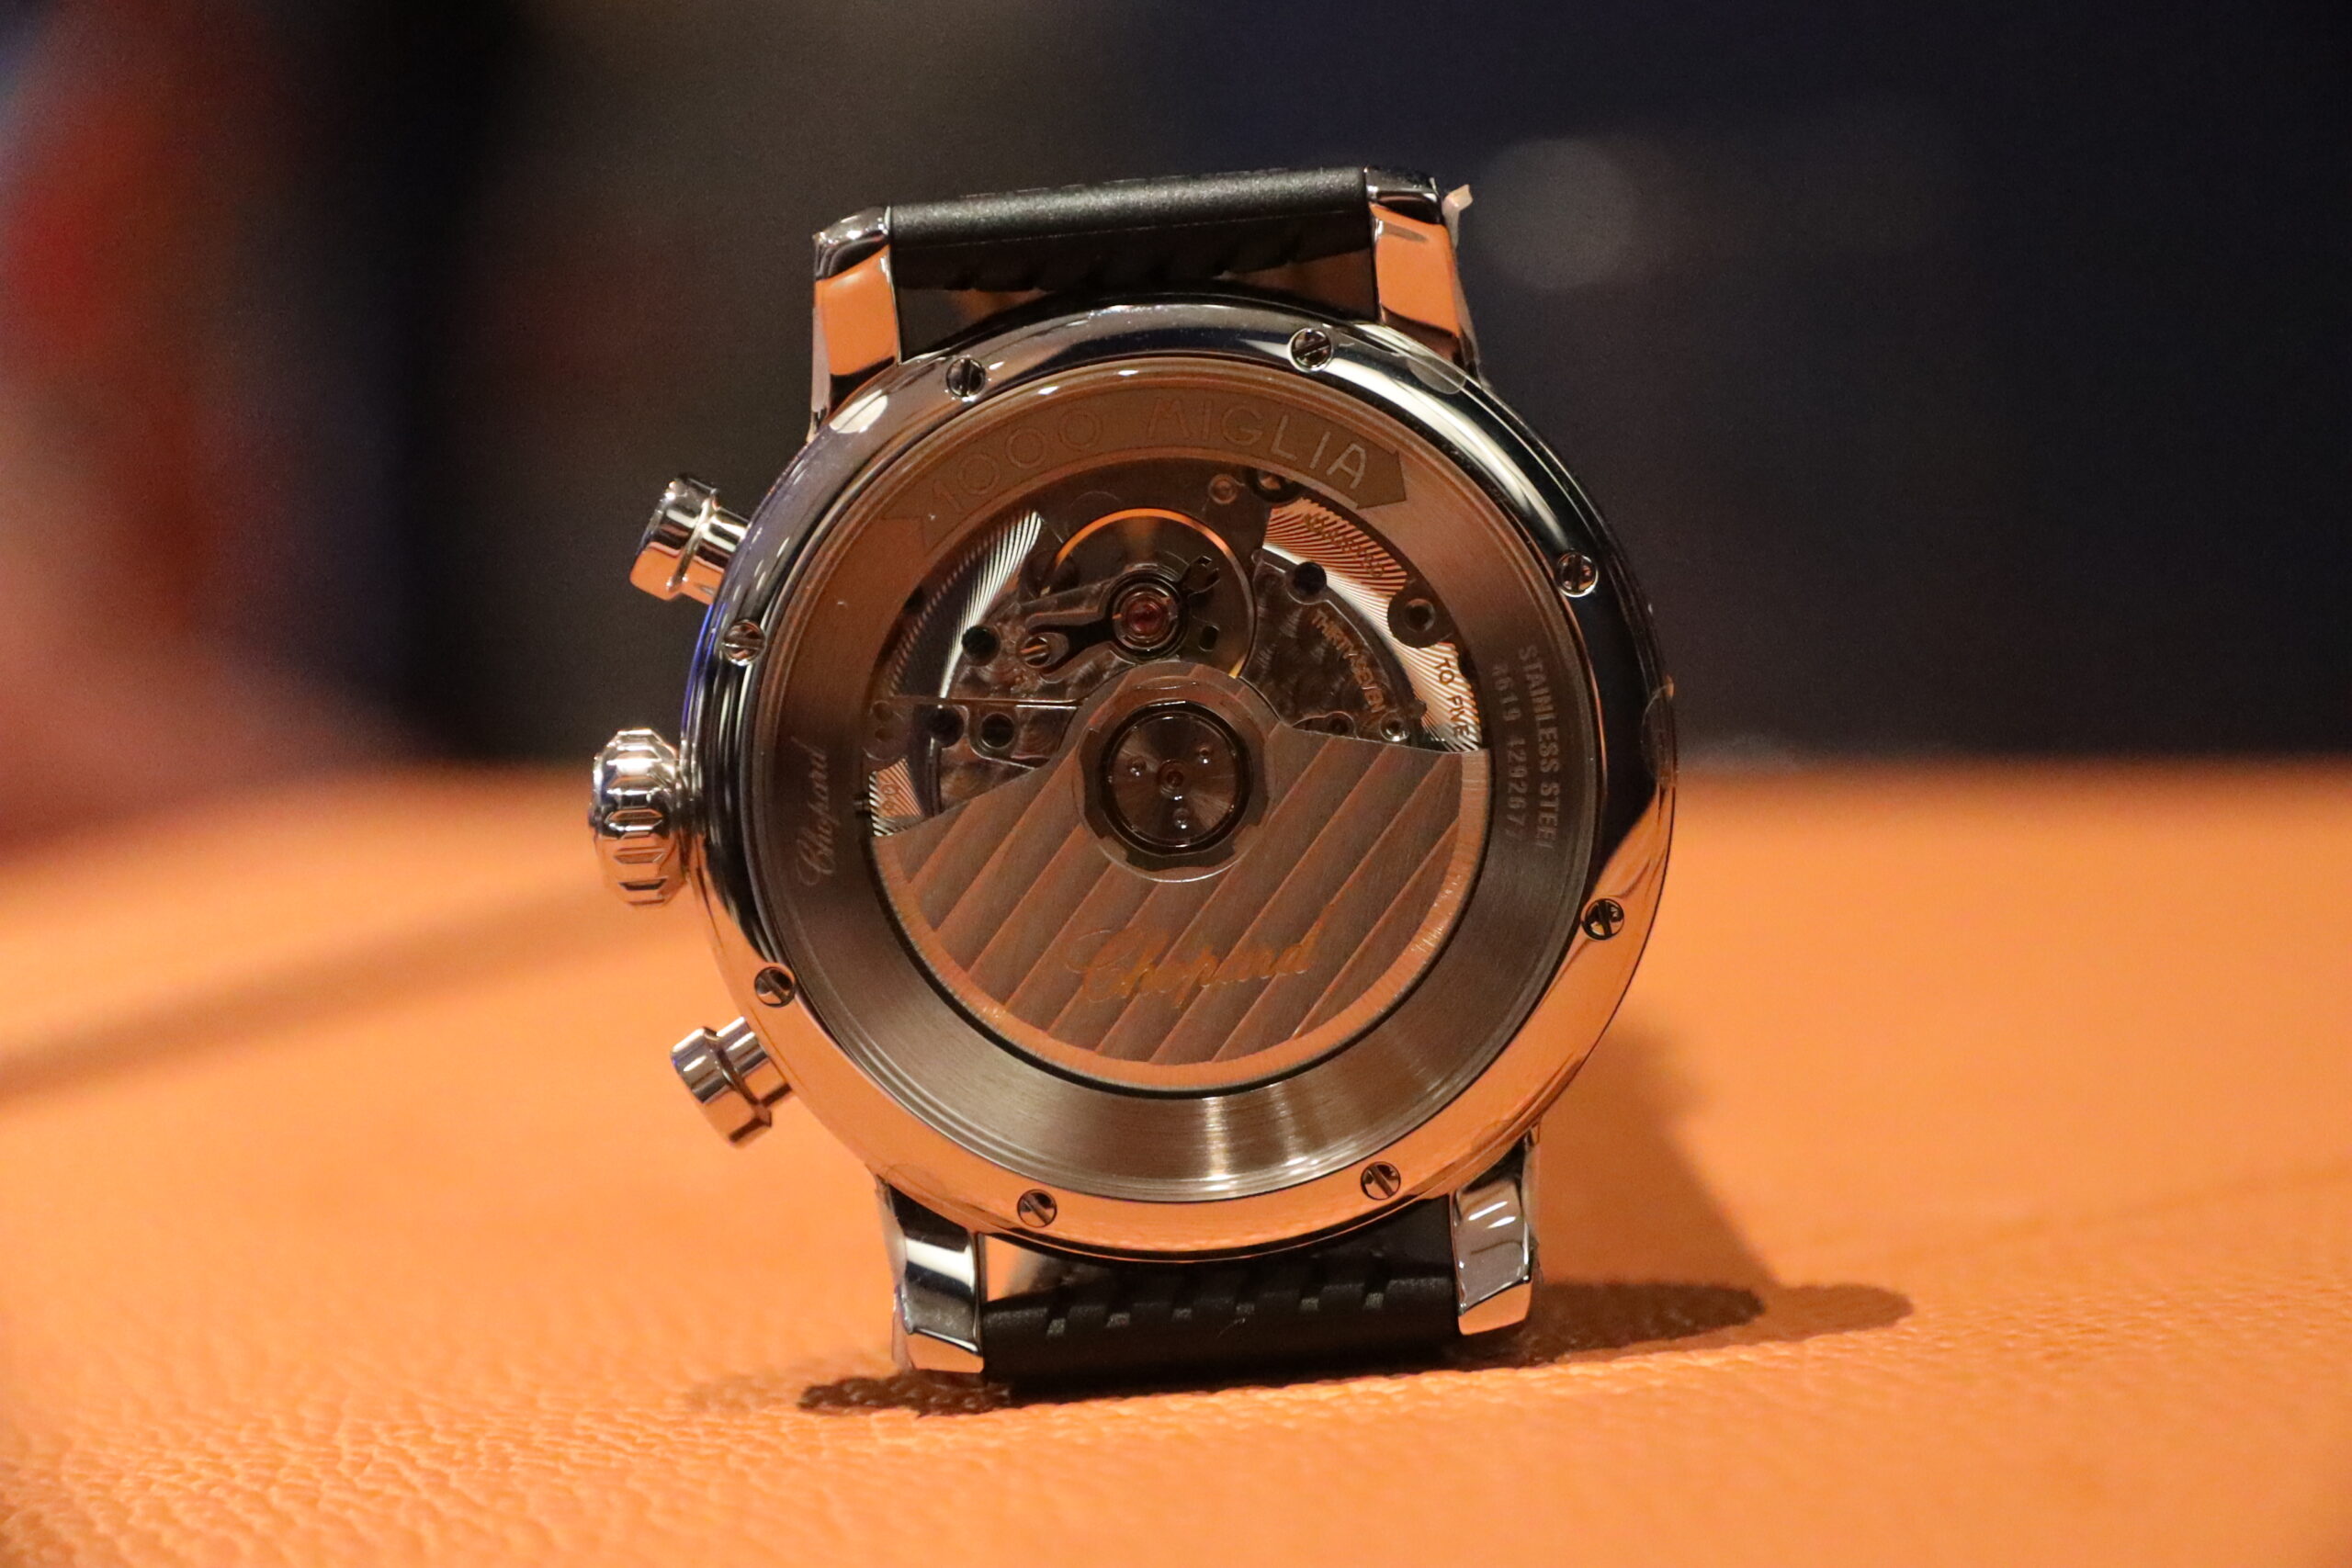 Exclusive: A Sneak Peek at the Chopard Calibre L.U.C 03.07-L, a New  Manual-Wind Chronograph with the Geneva Seal